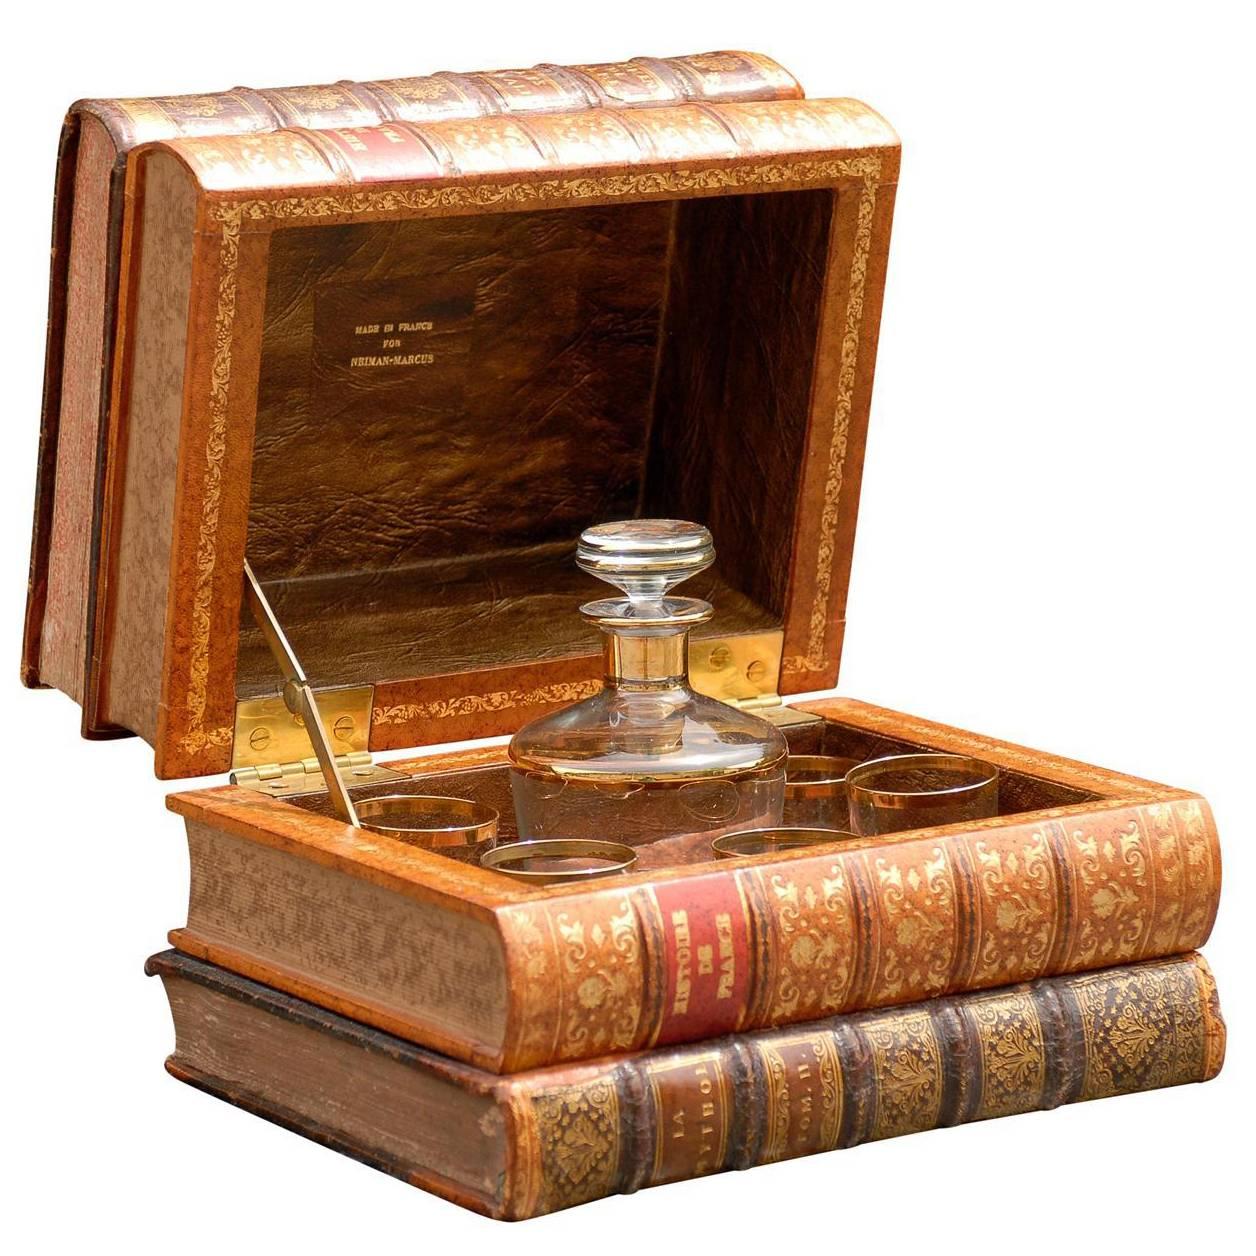 French Decanter Set in Leather Faux Books Made for Neiman Markus from the 1920s